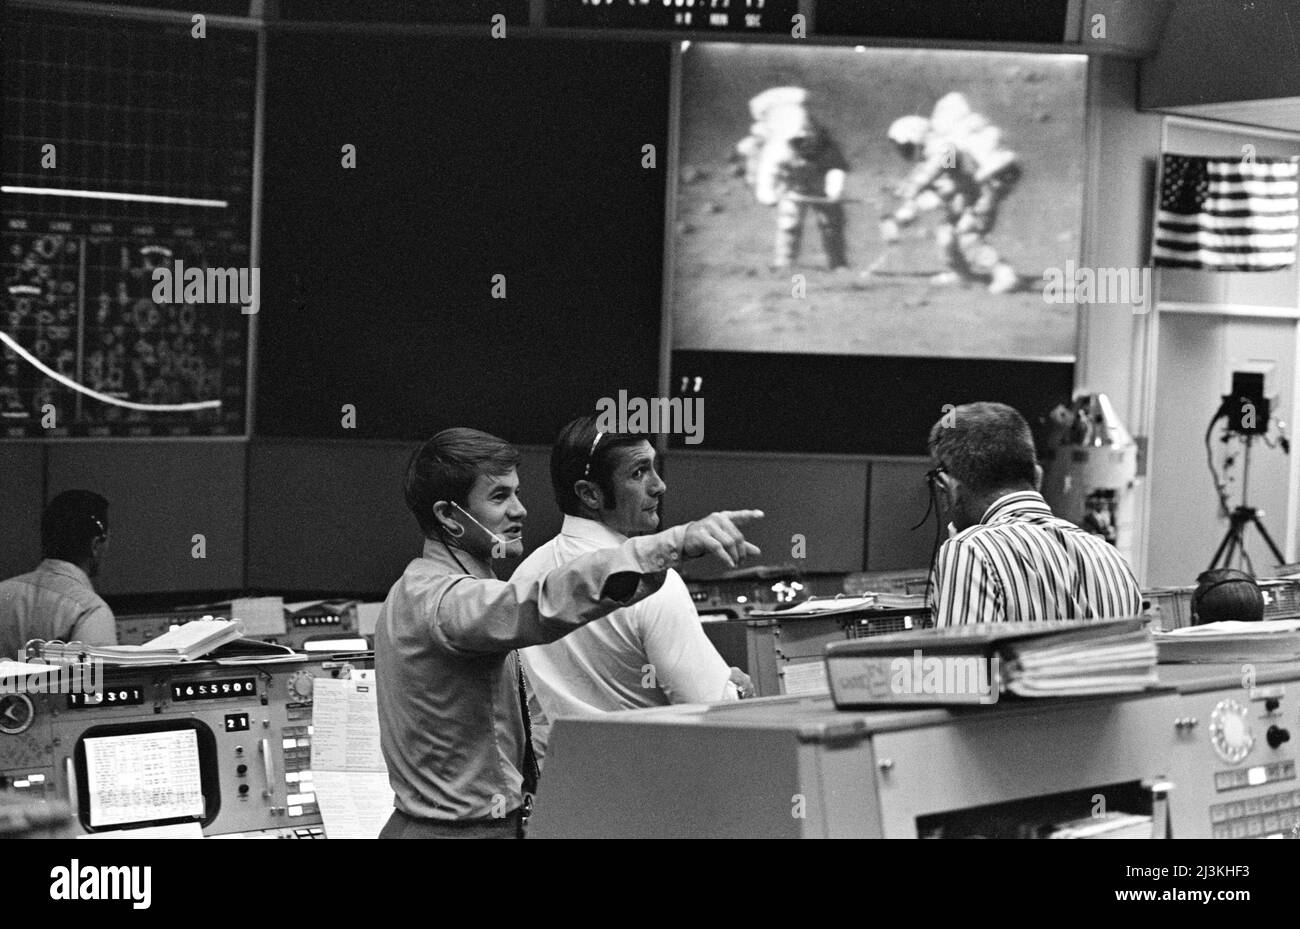 Mission Operations Control Room (Mission Control) in Houston during the third Apollo 15 moonwalk, with astronauts Jim Irwin (left) and Dave Scott (right). CapCom Joe Allen (left) is pointing toward the back of the room, Stock Photo